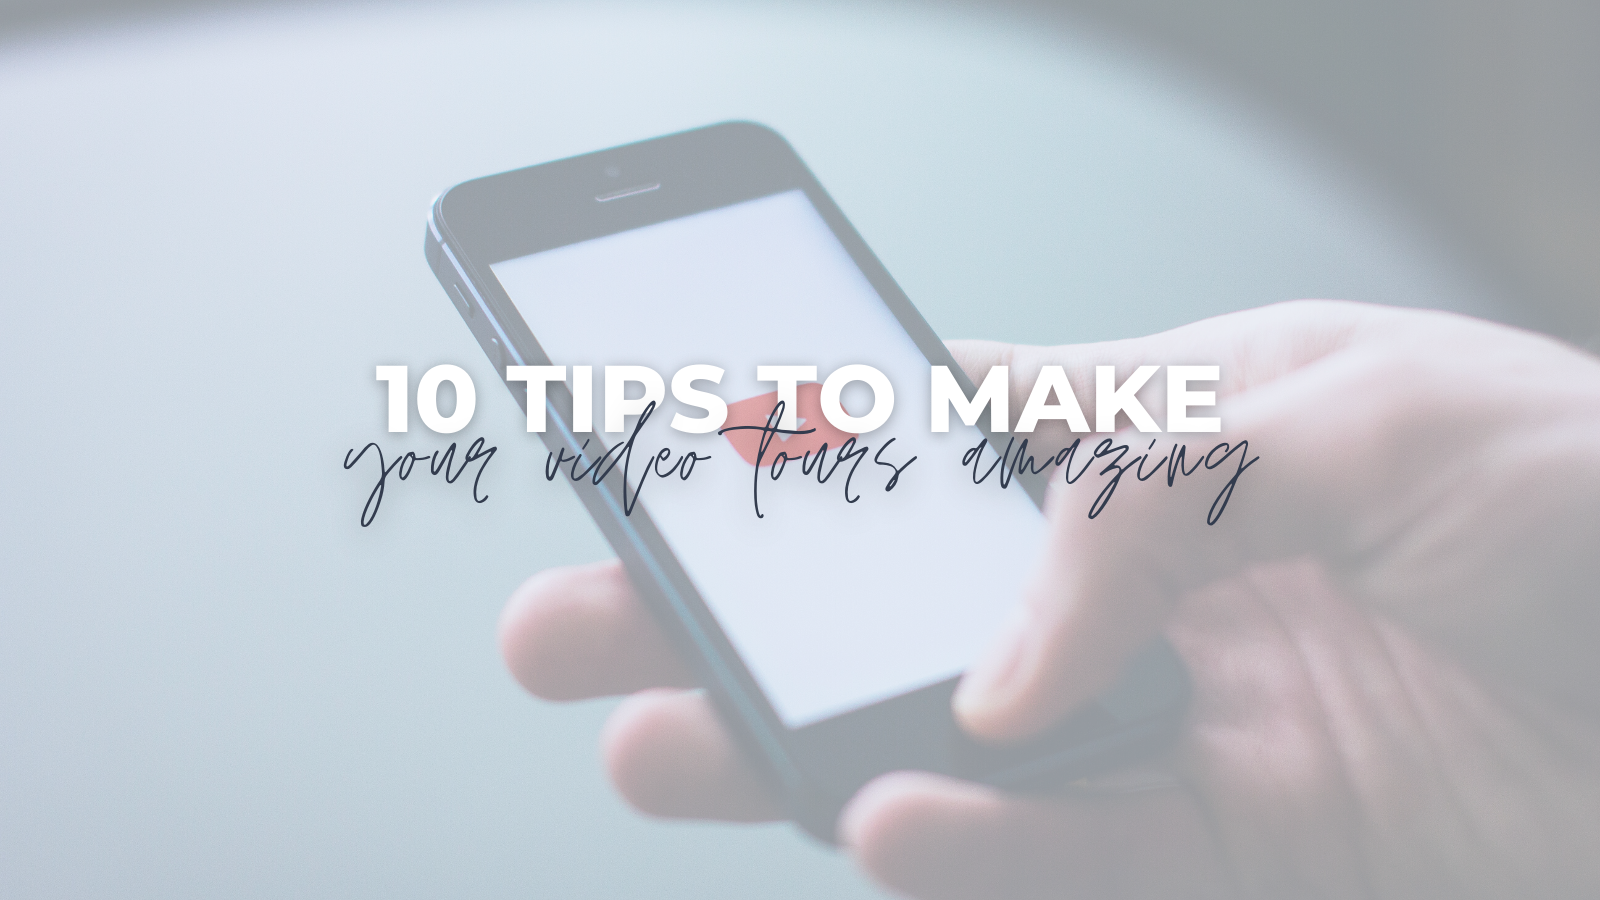 10 Tips to Make Your Real Estate Video Tours Amazing